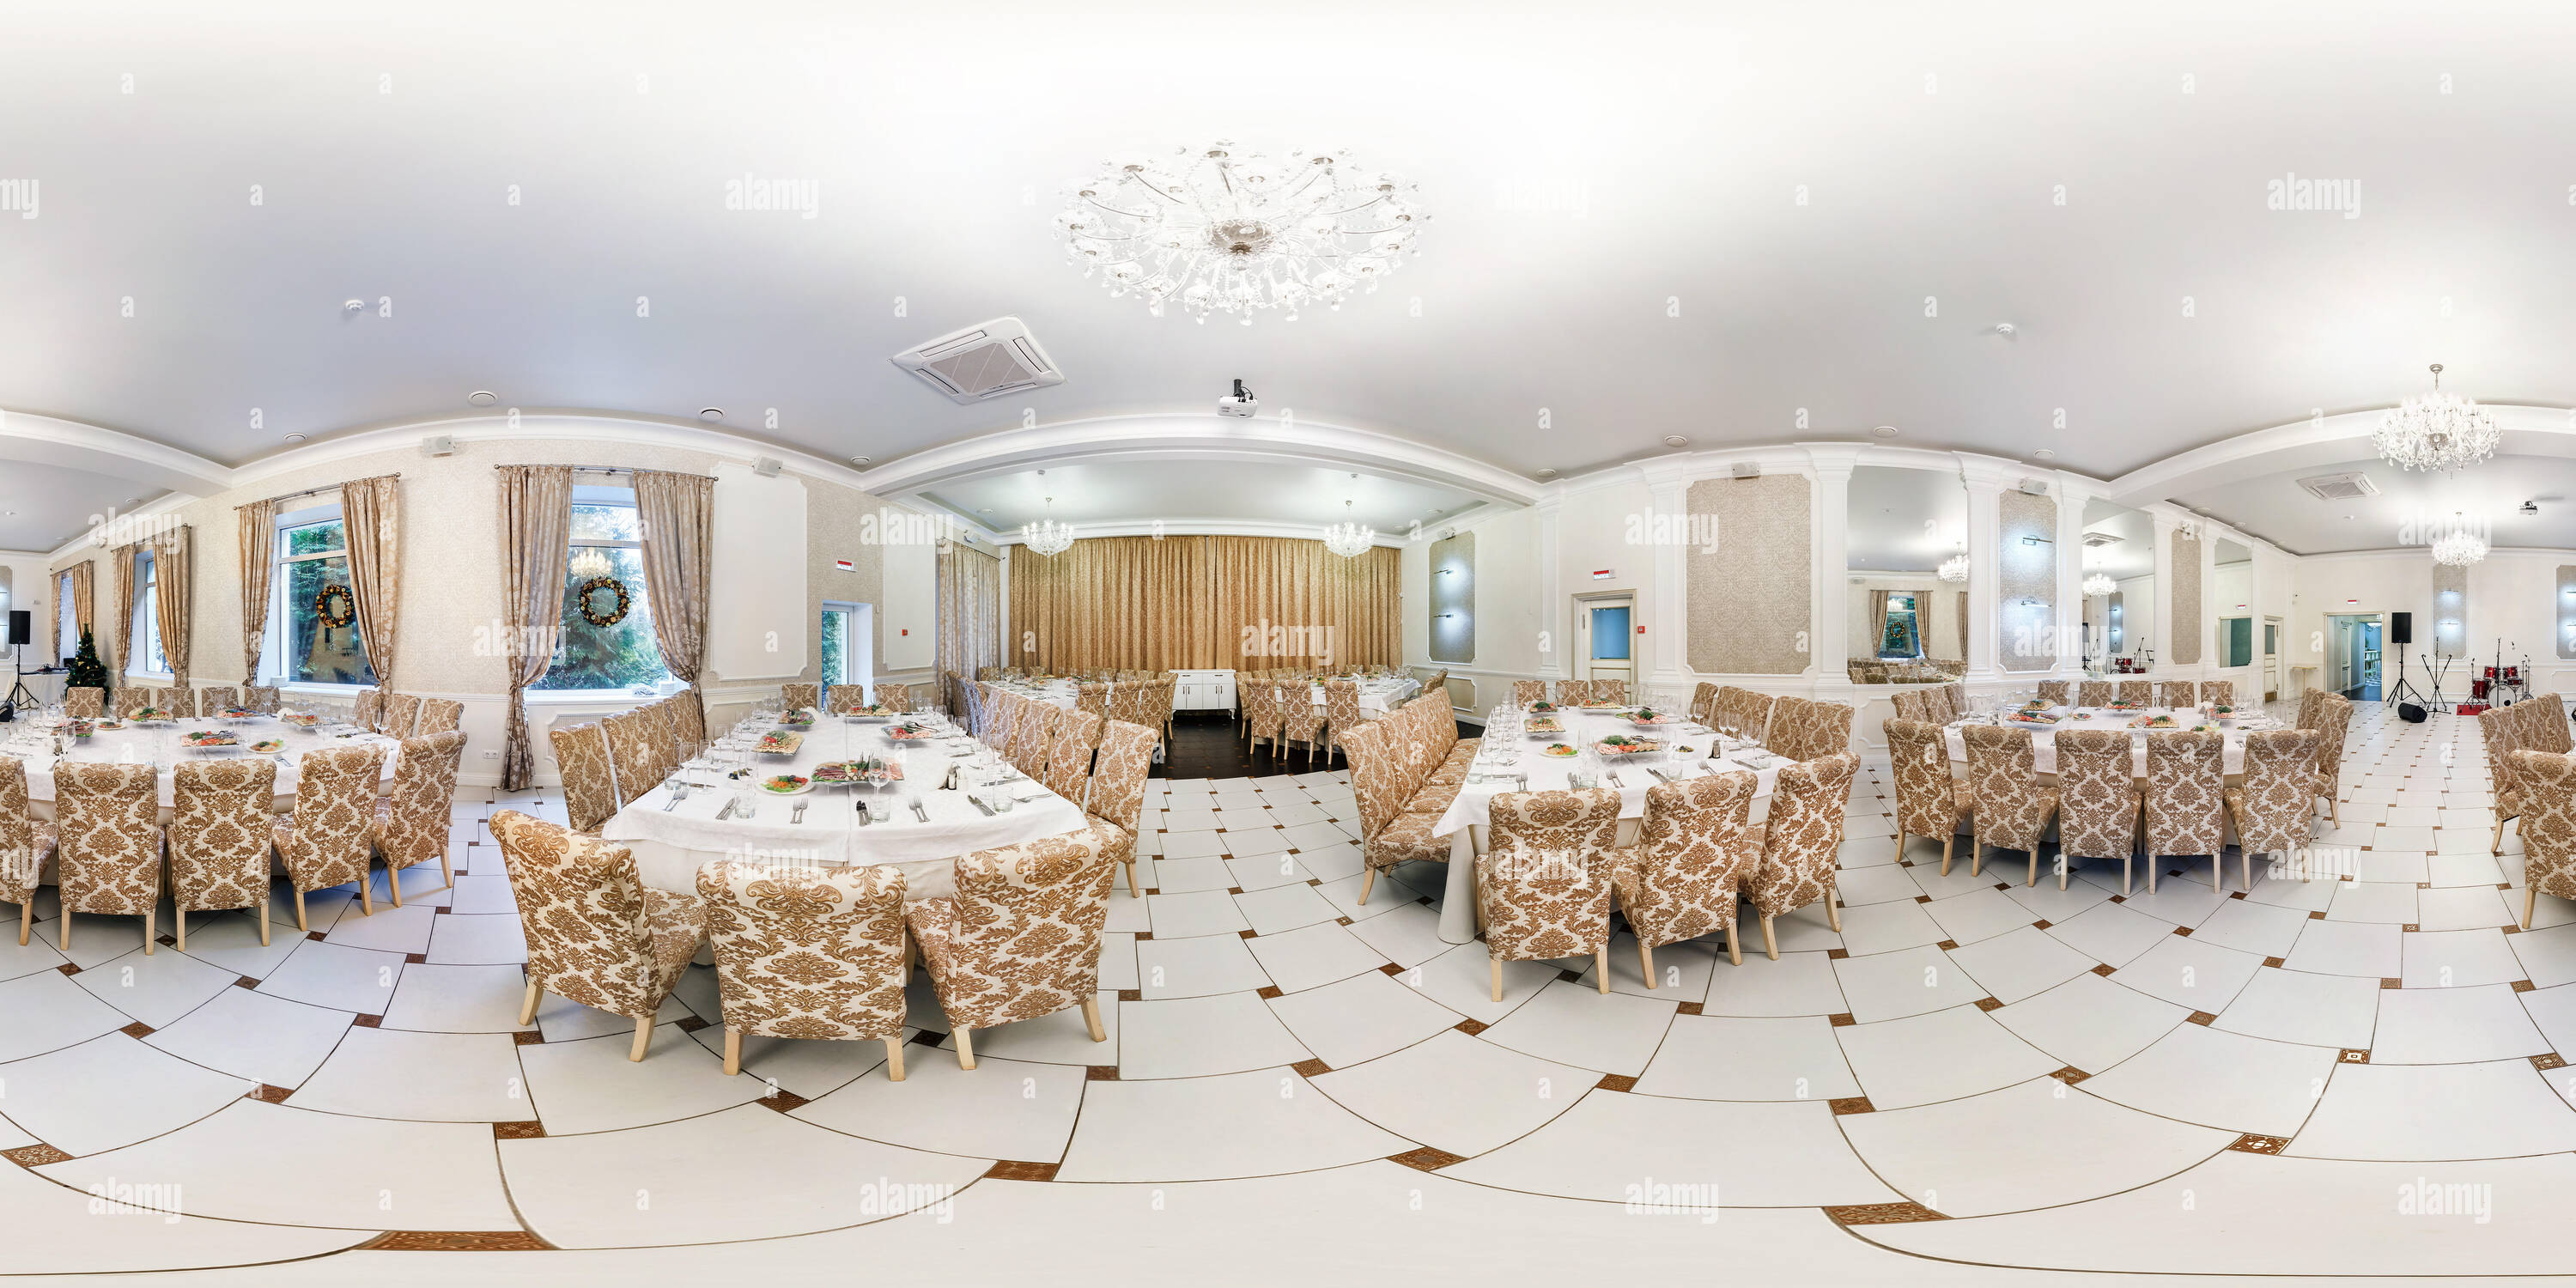 360 degree panoramic view of MINSK, BELARUS - OCTOBER 25, 2014: full 360 degree panorama in equirectangular spherical equidistant projection in stylish cafe in white color, VR con